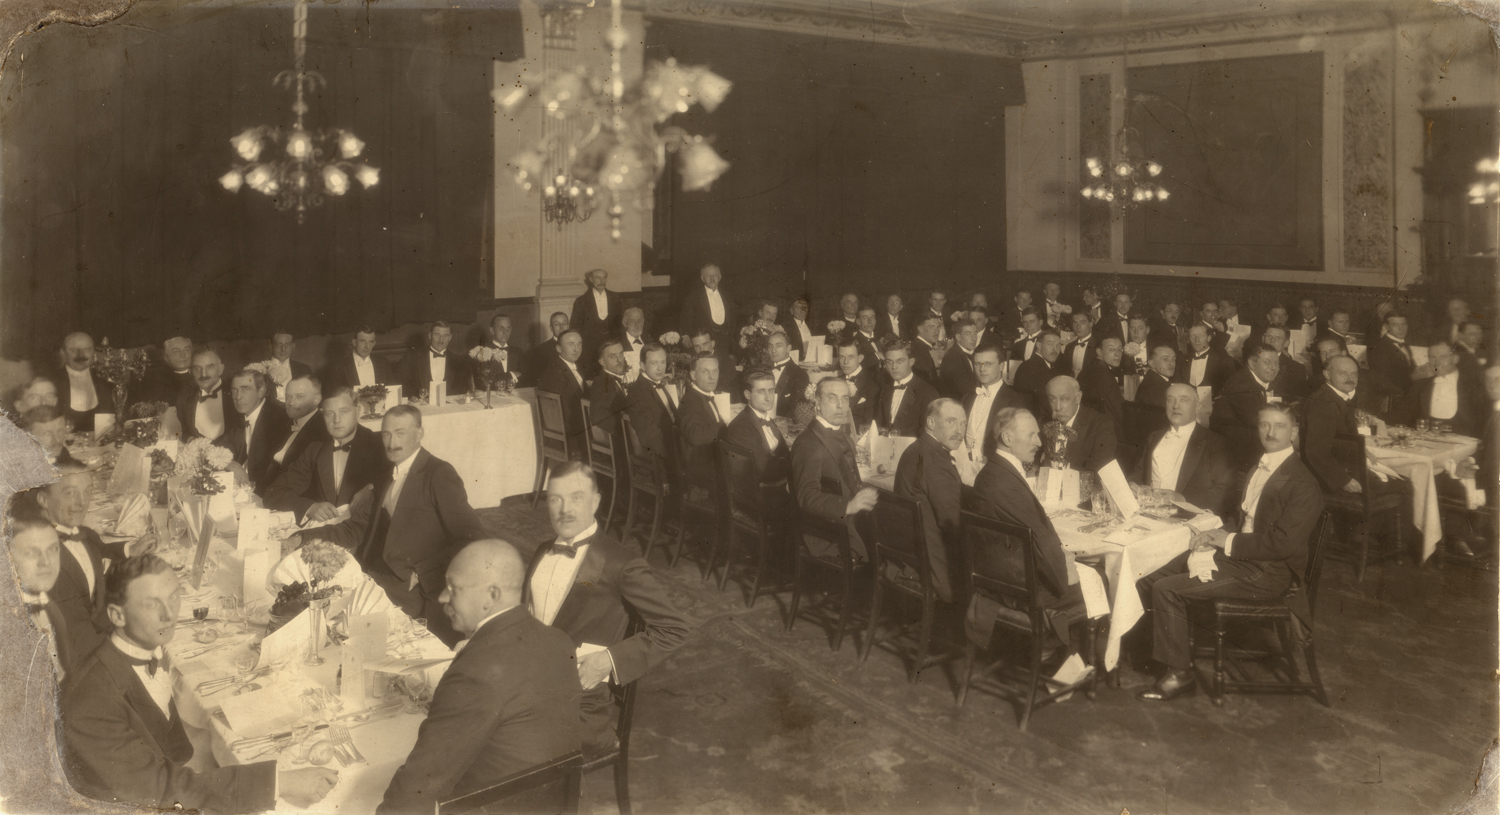 Photograph of Downing Association founding dinner, 1922